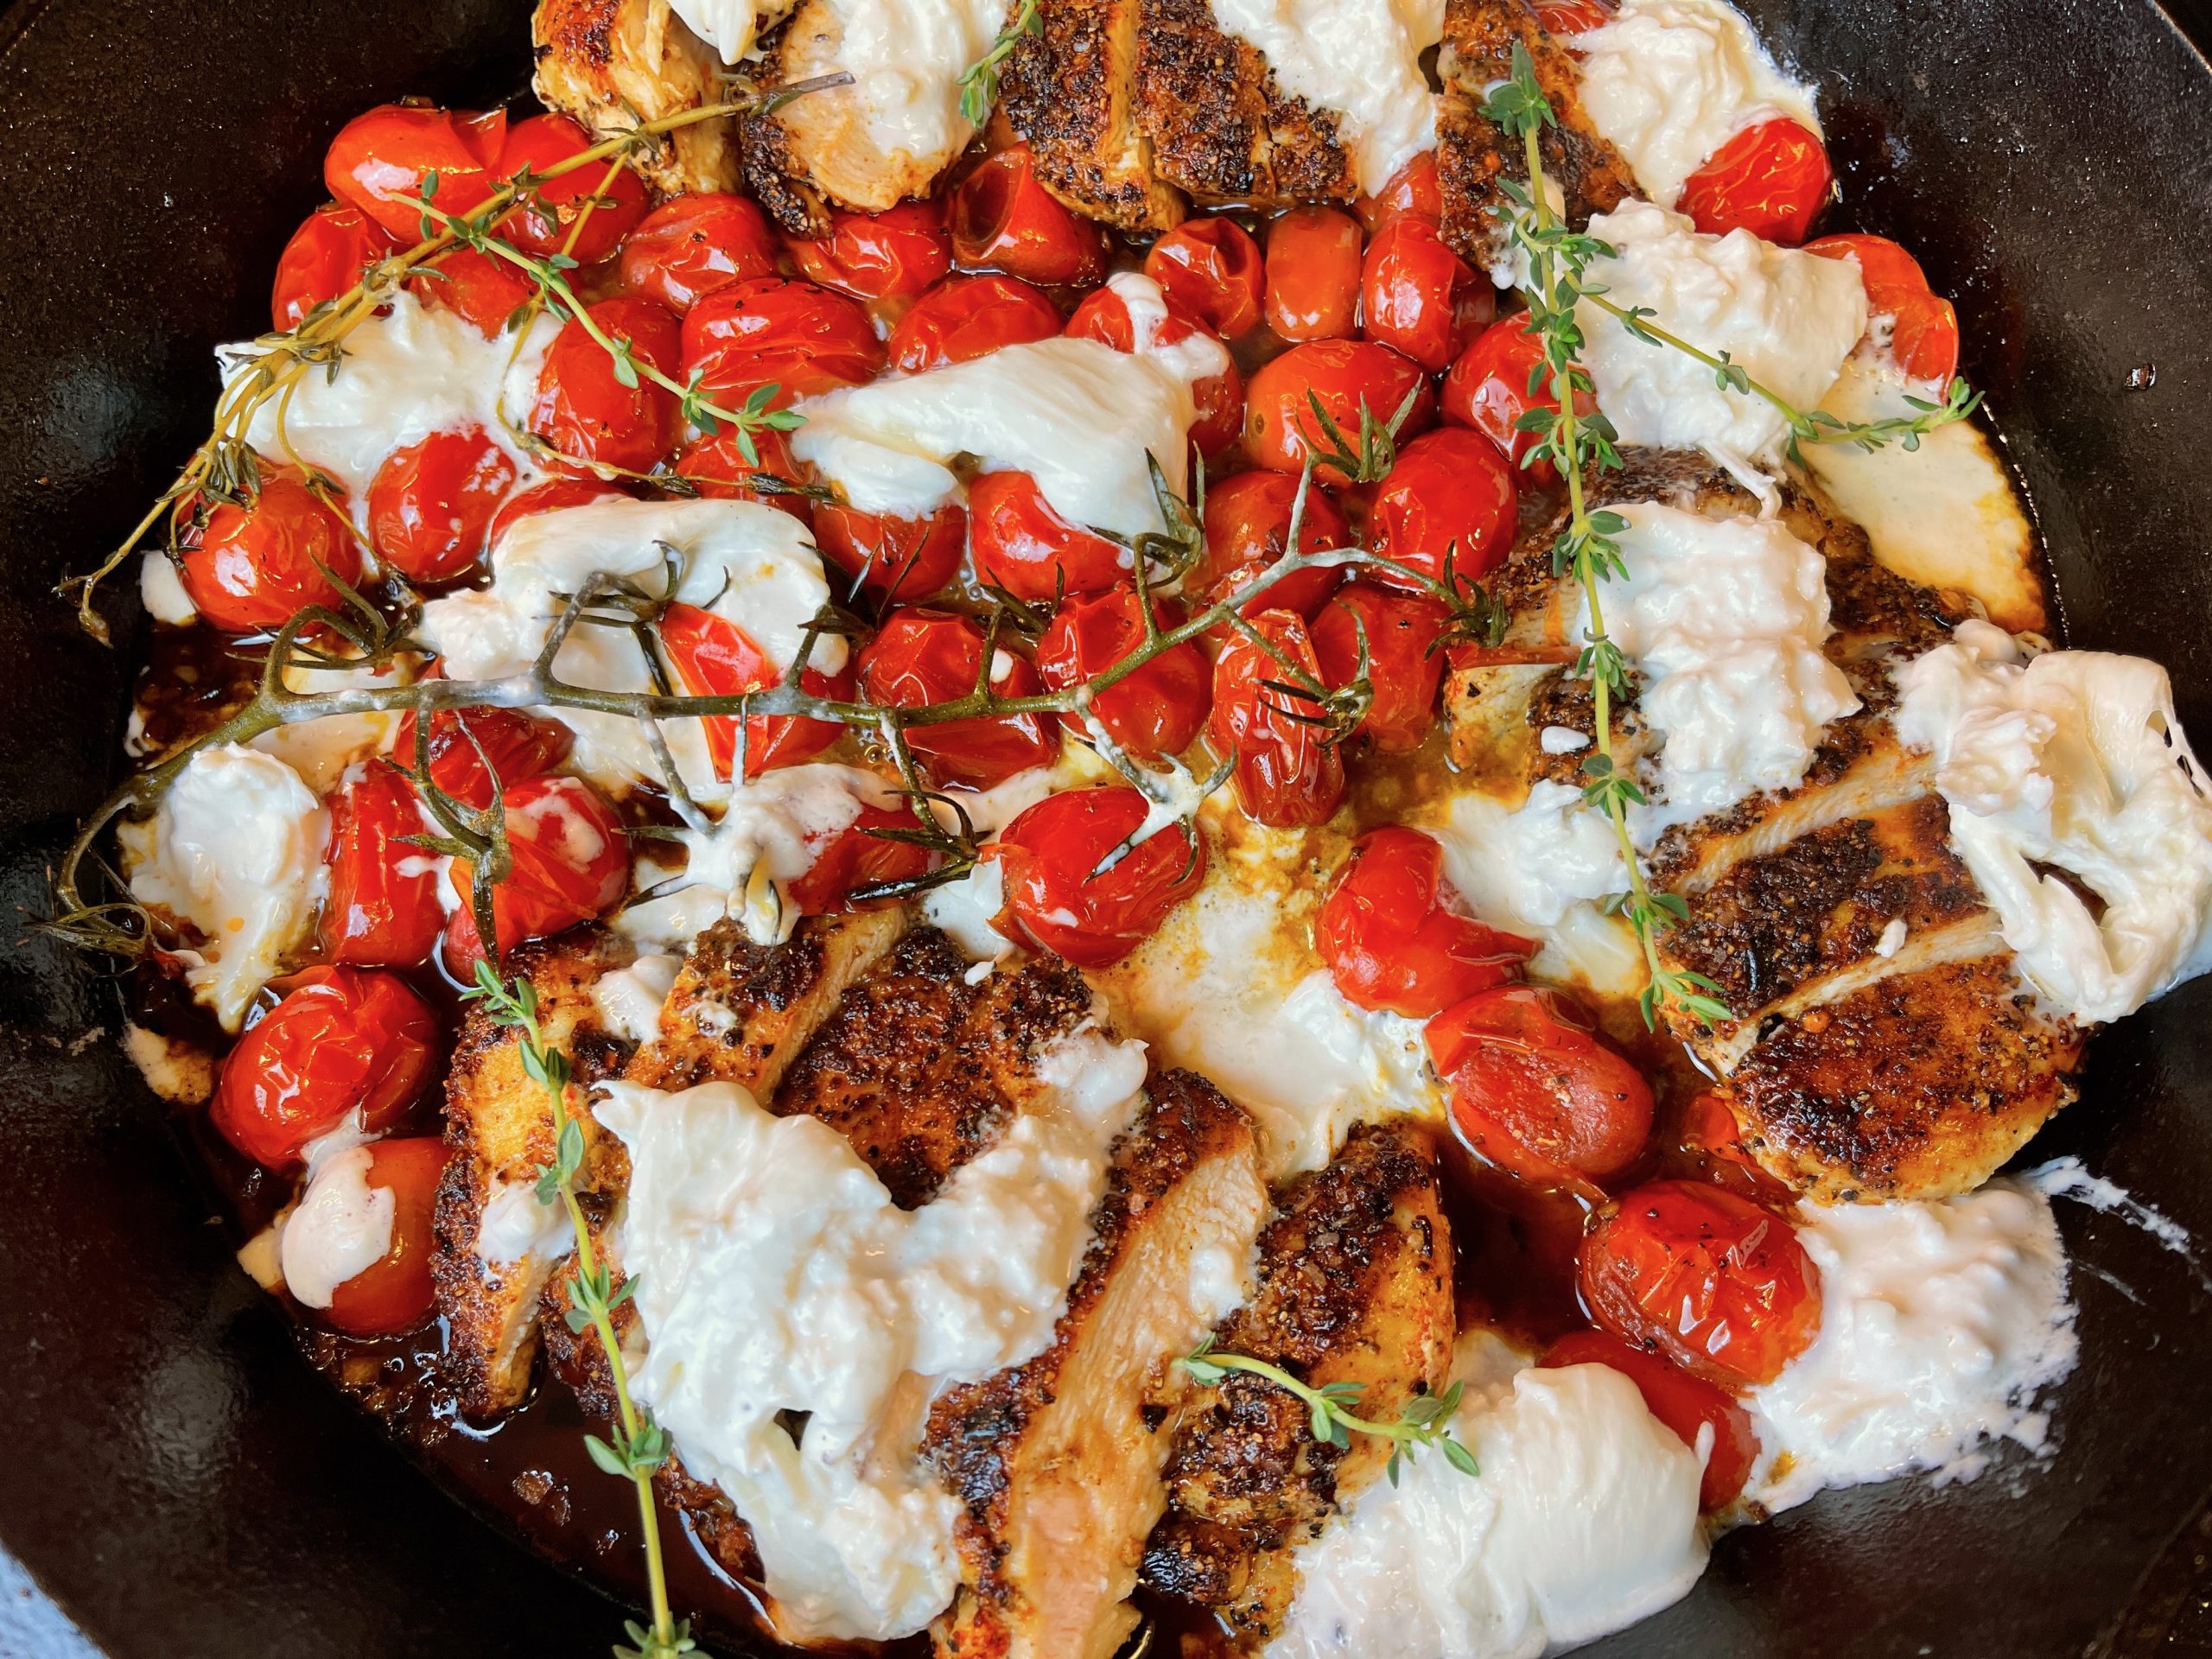 Break the burrata balls into pieces and place over the chicken and tomatoes and turn off the heat.